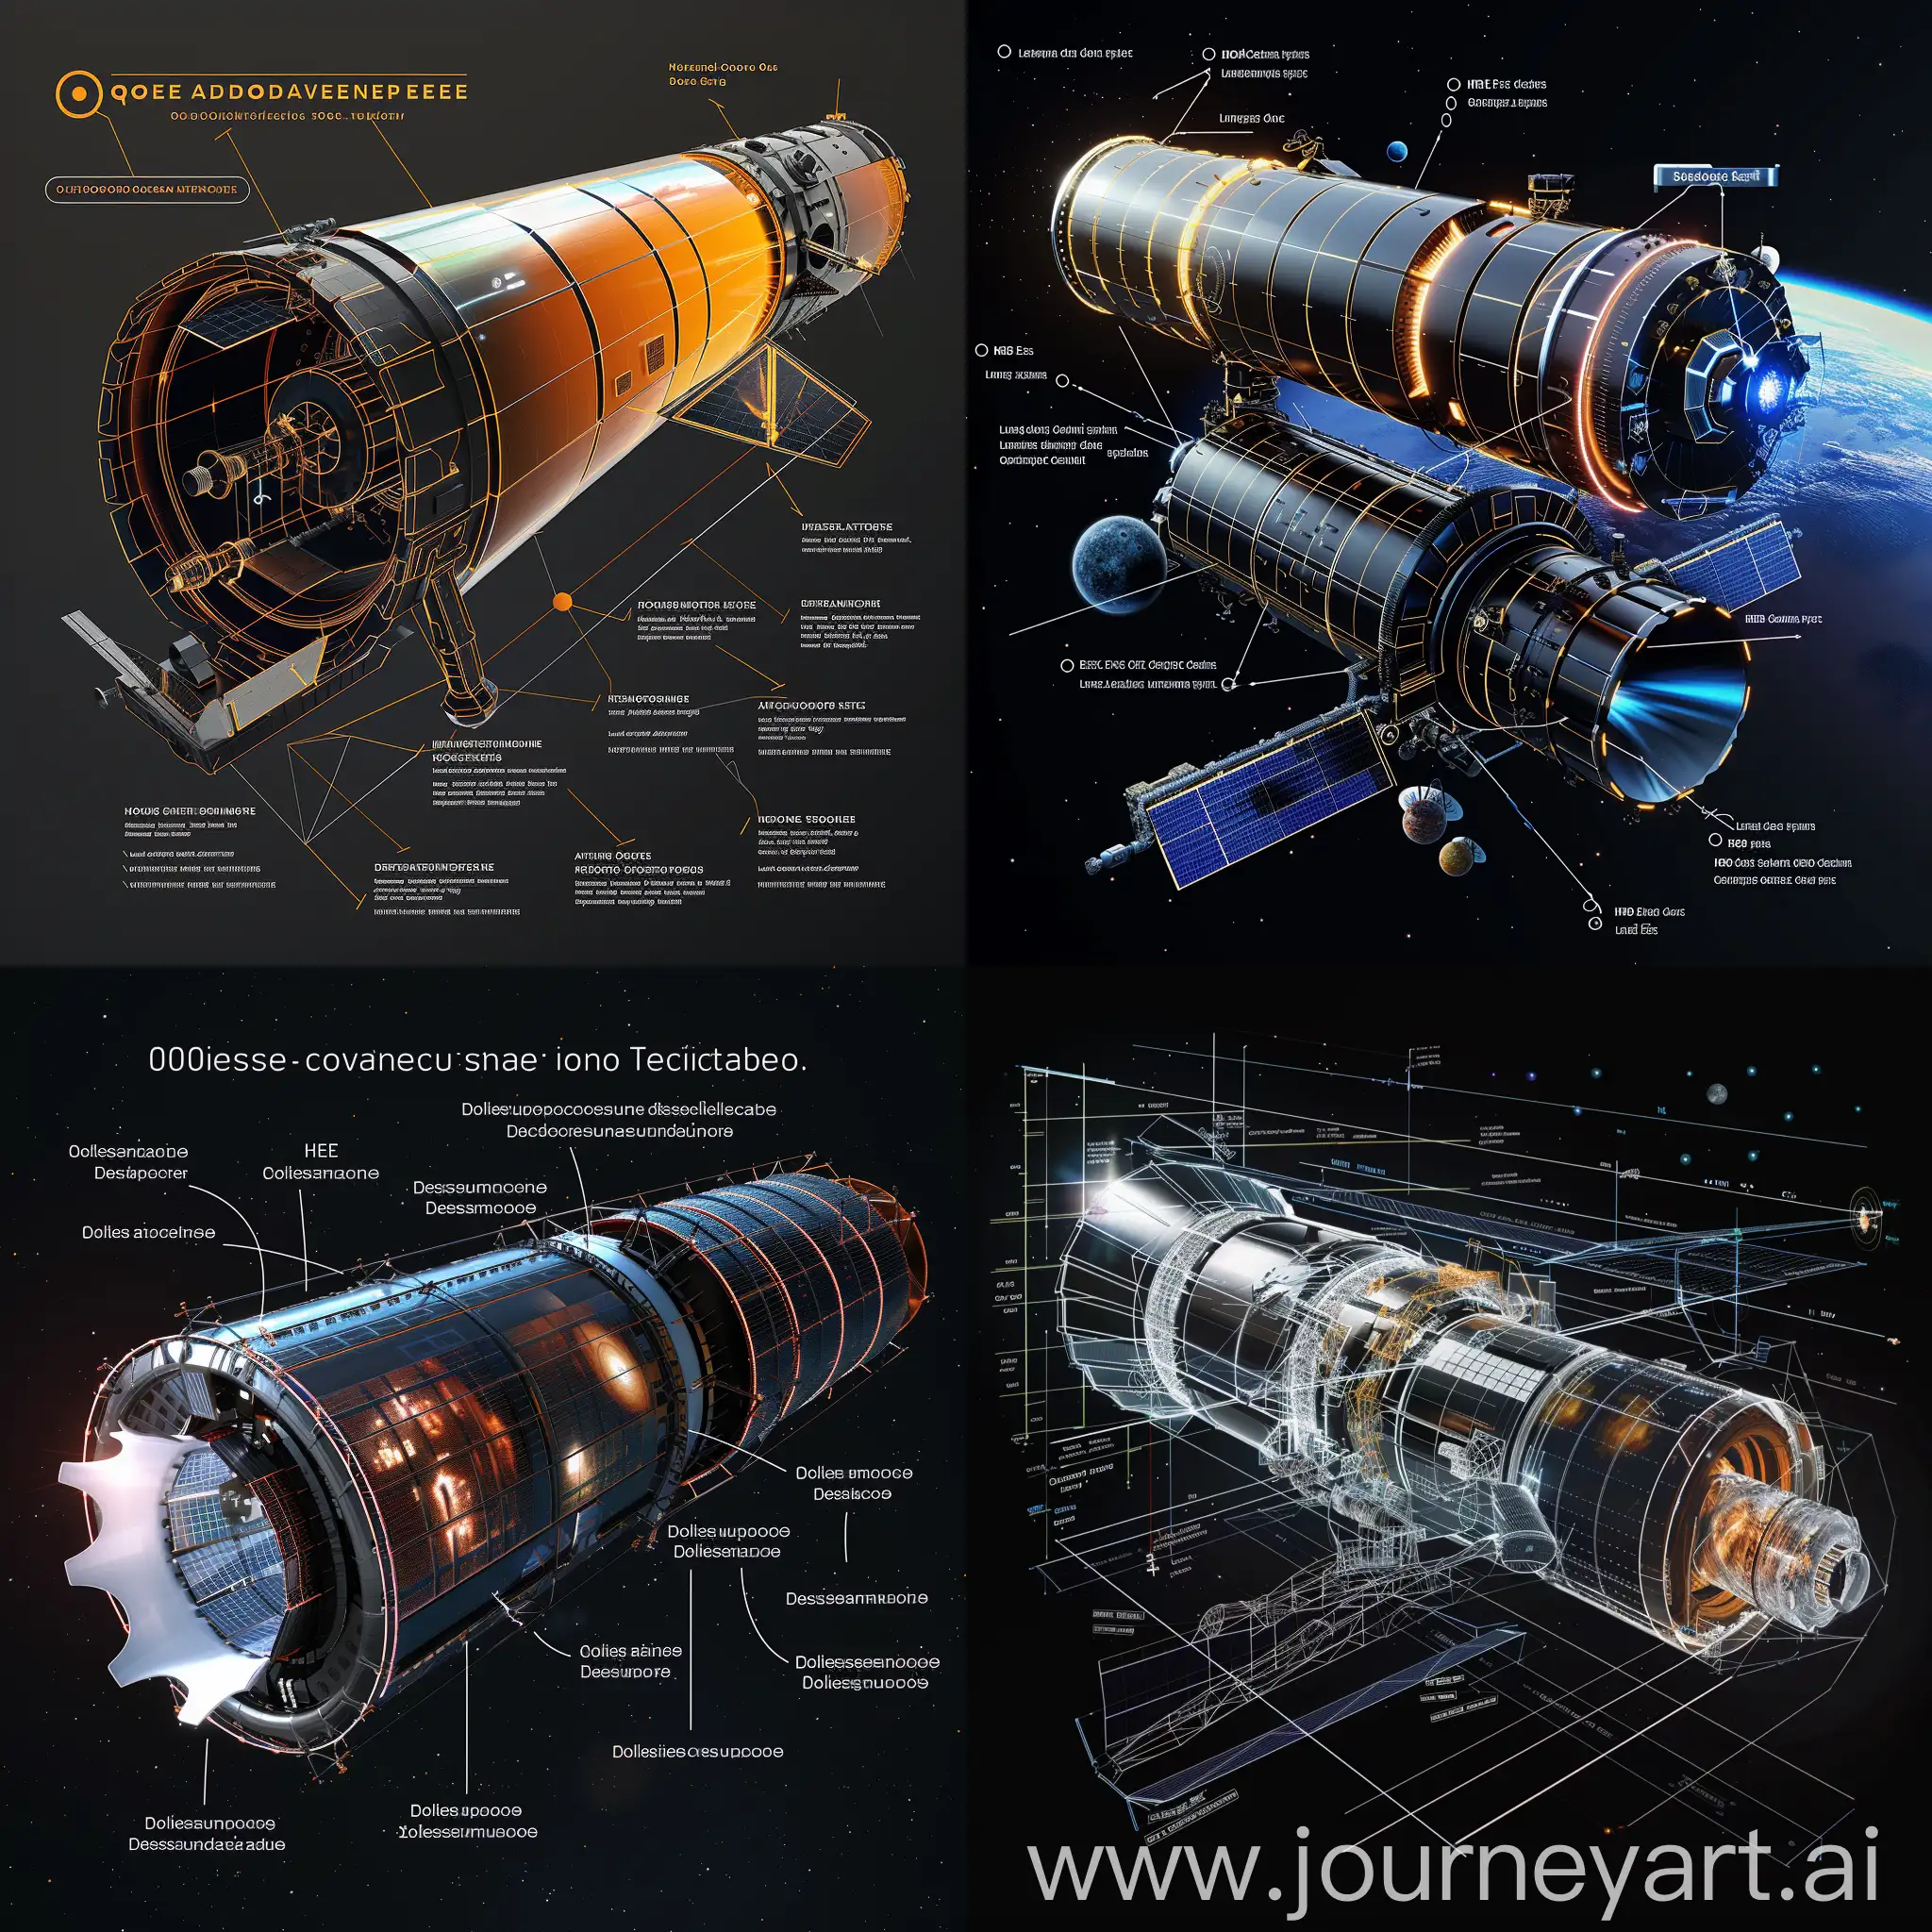 Futuristic space telescope in Earth Orbit, Adaptive Optics, Quantum Sensors, Cryogenic Cooling System, Multi-Spectral Imaging, Artificial Intelligence (AI) Integration, Lightweight Composite Materials, Electric Propulsion System, High-Energy Particle Detectors, Quantum Computing, Advanced Power Generation, Sunshield Technology, Deployable Mirror Segments, Solar Sail Propulsion, Starshade for Exoplanet Imaging, Laser Communication System, Self-Healing Materials, Radiation Shielding, Autonomous Navigation System, Modular Design for Upgradability, Inflatable Structures, Holographic Optical Elements (HOEs), Holographic Data Storage, Holographic Beam Splitters, Holographic Wavefront Sensing, Holographic Interferometry, Holographic Image Processing, Holographic Adaptive Optics, Holographic Spectroscopy, Holographic Display Interfaces, Holographic Control Systems, Holographic Solar Shields, Holographic Lenses and Mirrors, Holographic Solar Panels, Holographic Thermal Control Systems, Holographic Communication Antennas, Holographic Radiation Shields, Holographic Navigation Markers, Holographic Debris Shields, Holographic Structural Reinforcements, Holographic Deployable Arrays, in cinematic style